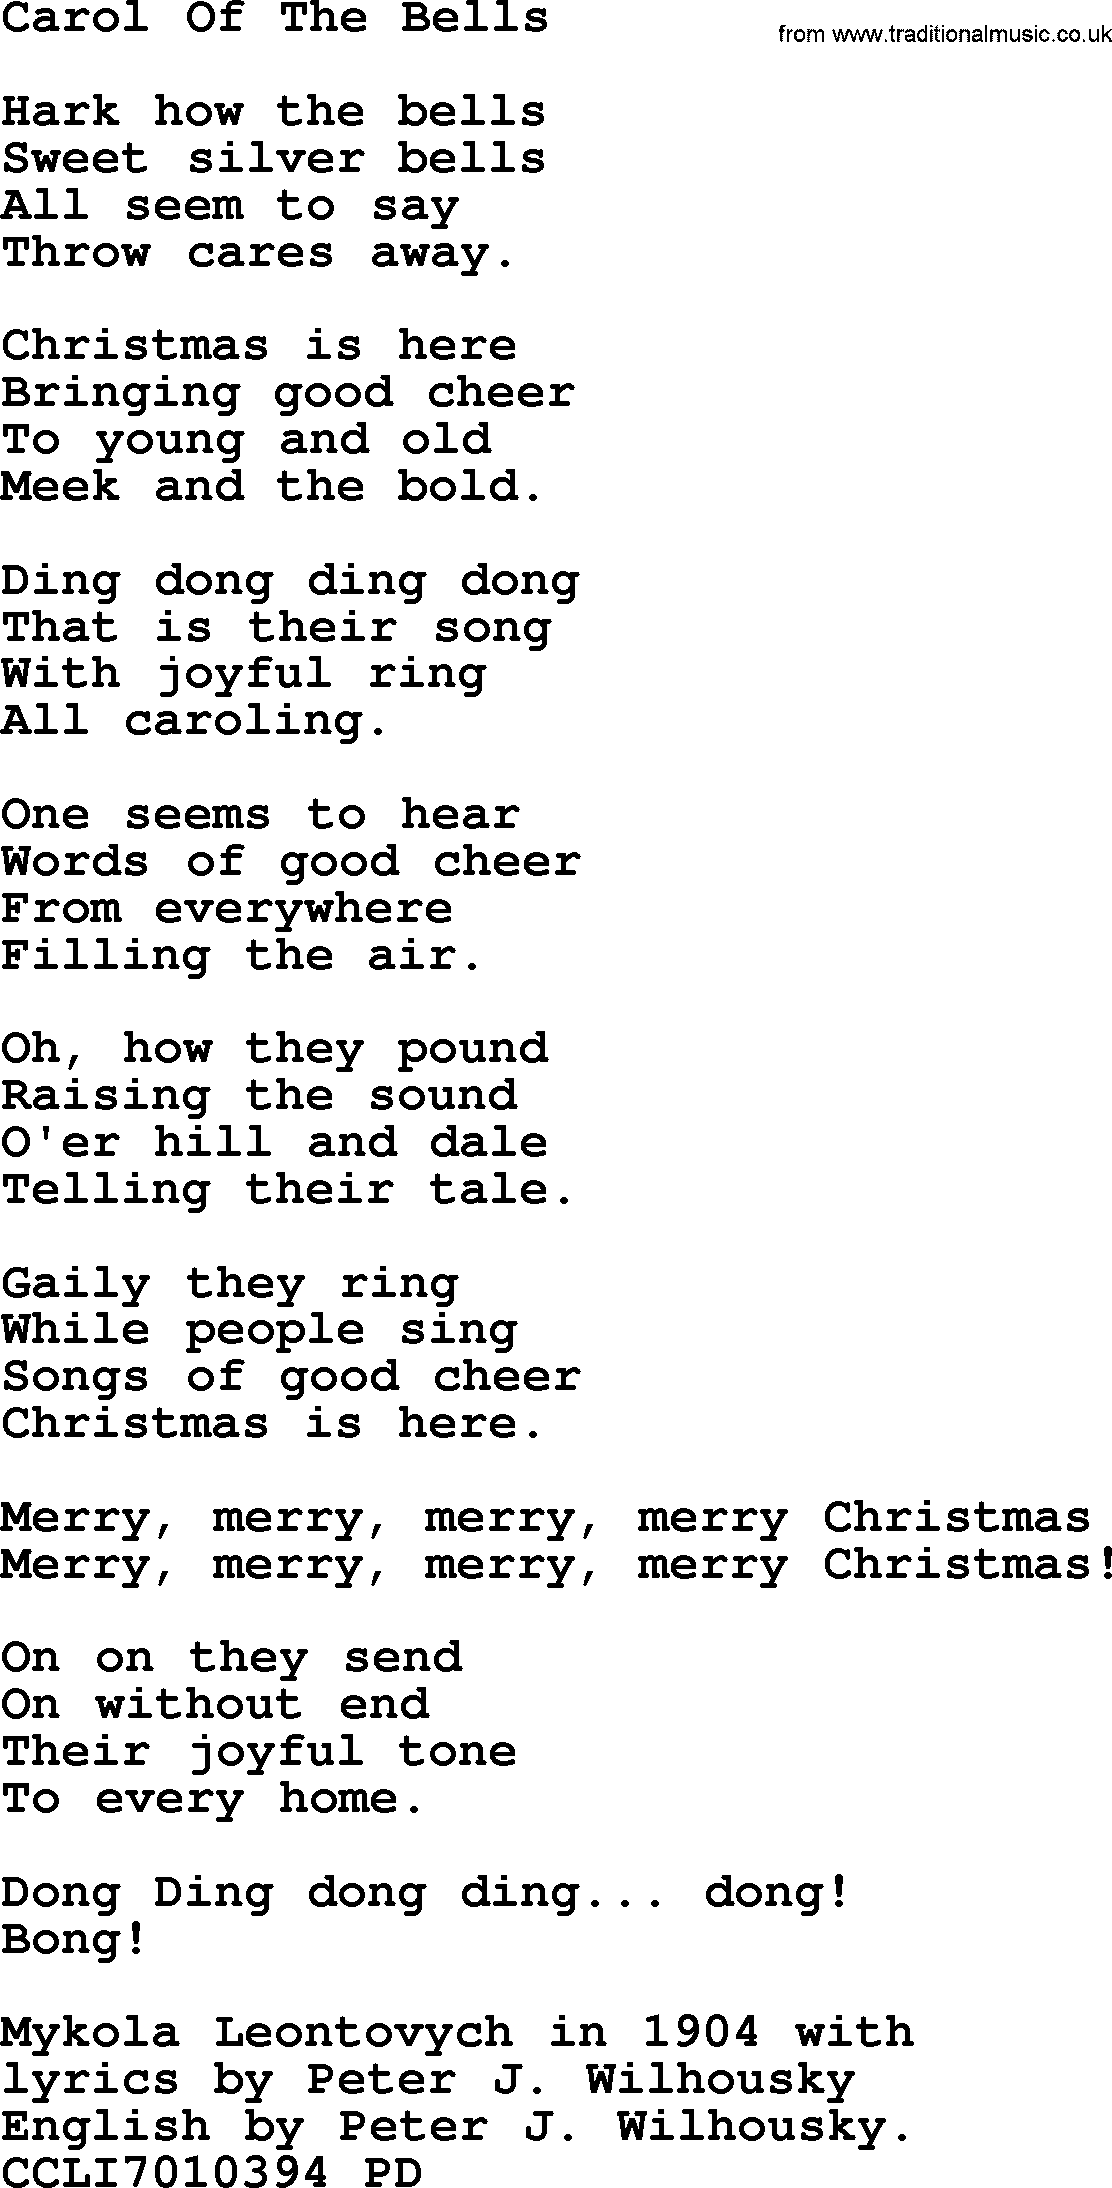 Christmas Powerpoints Song Carol Of The Bells Lyrics PPT for 